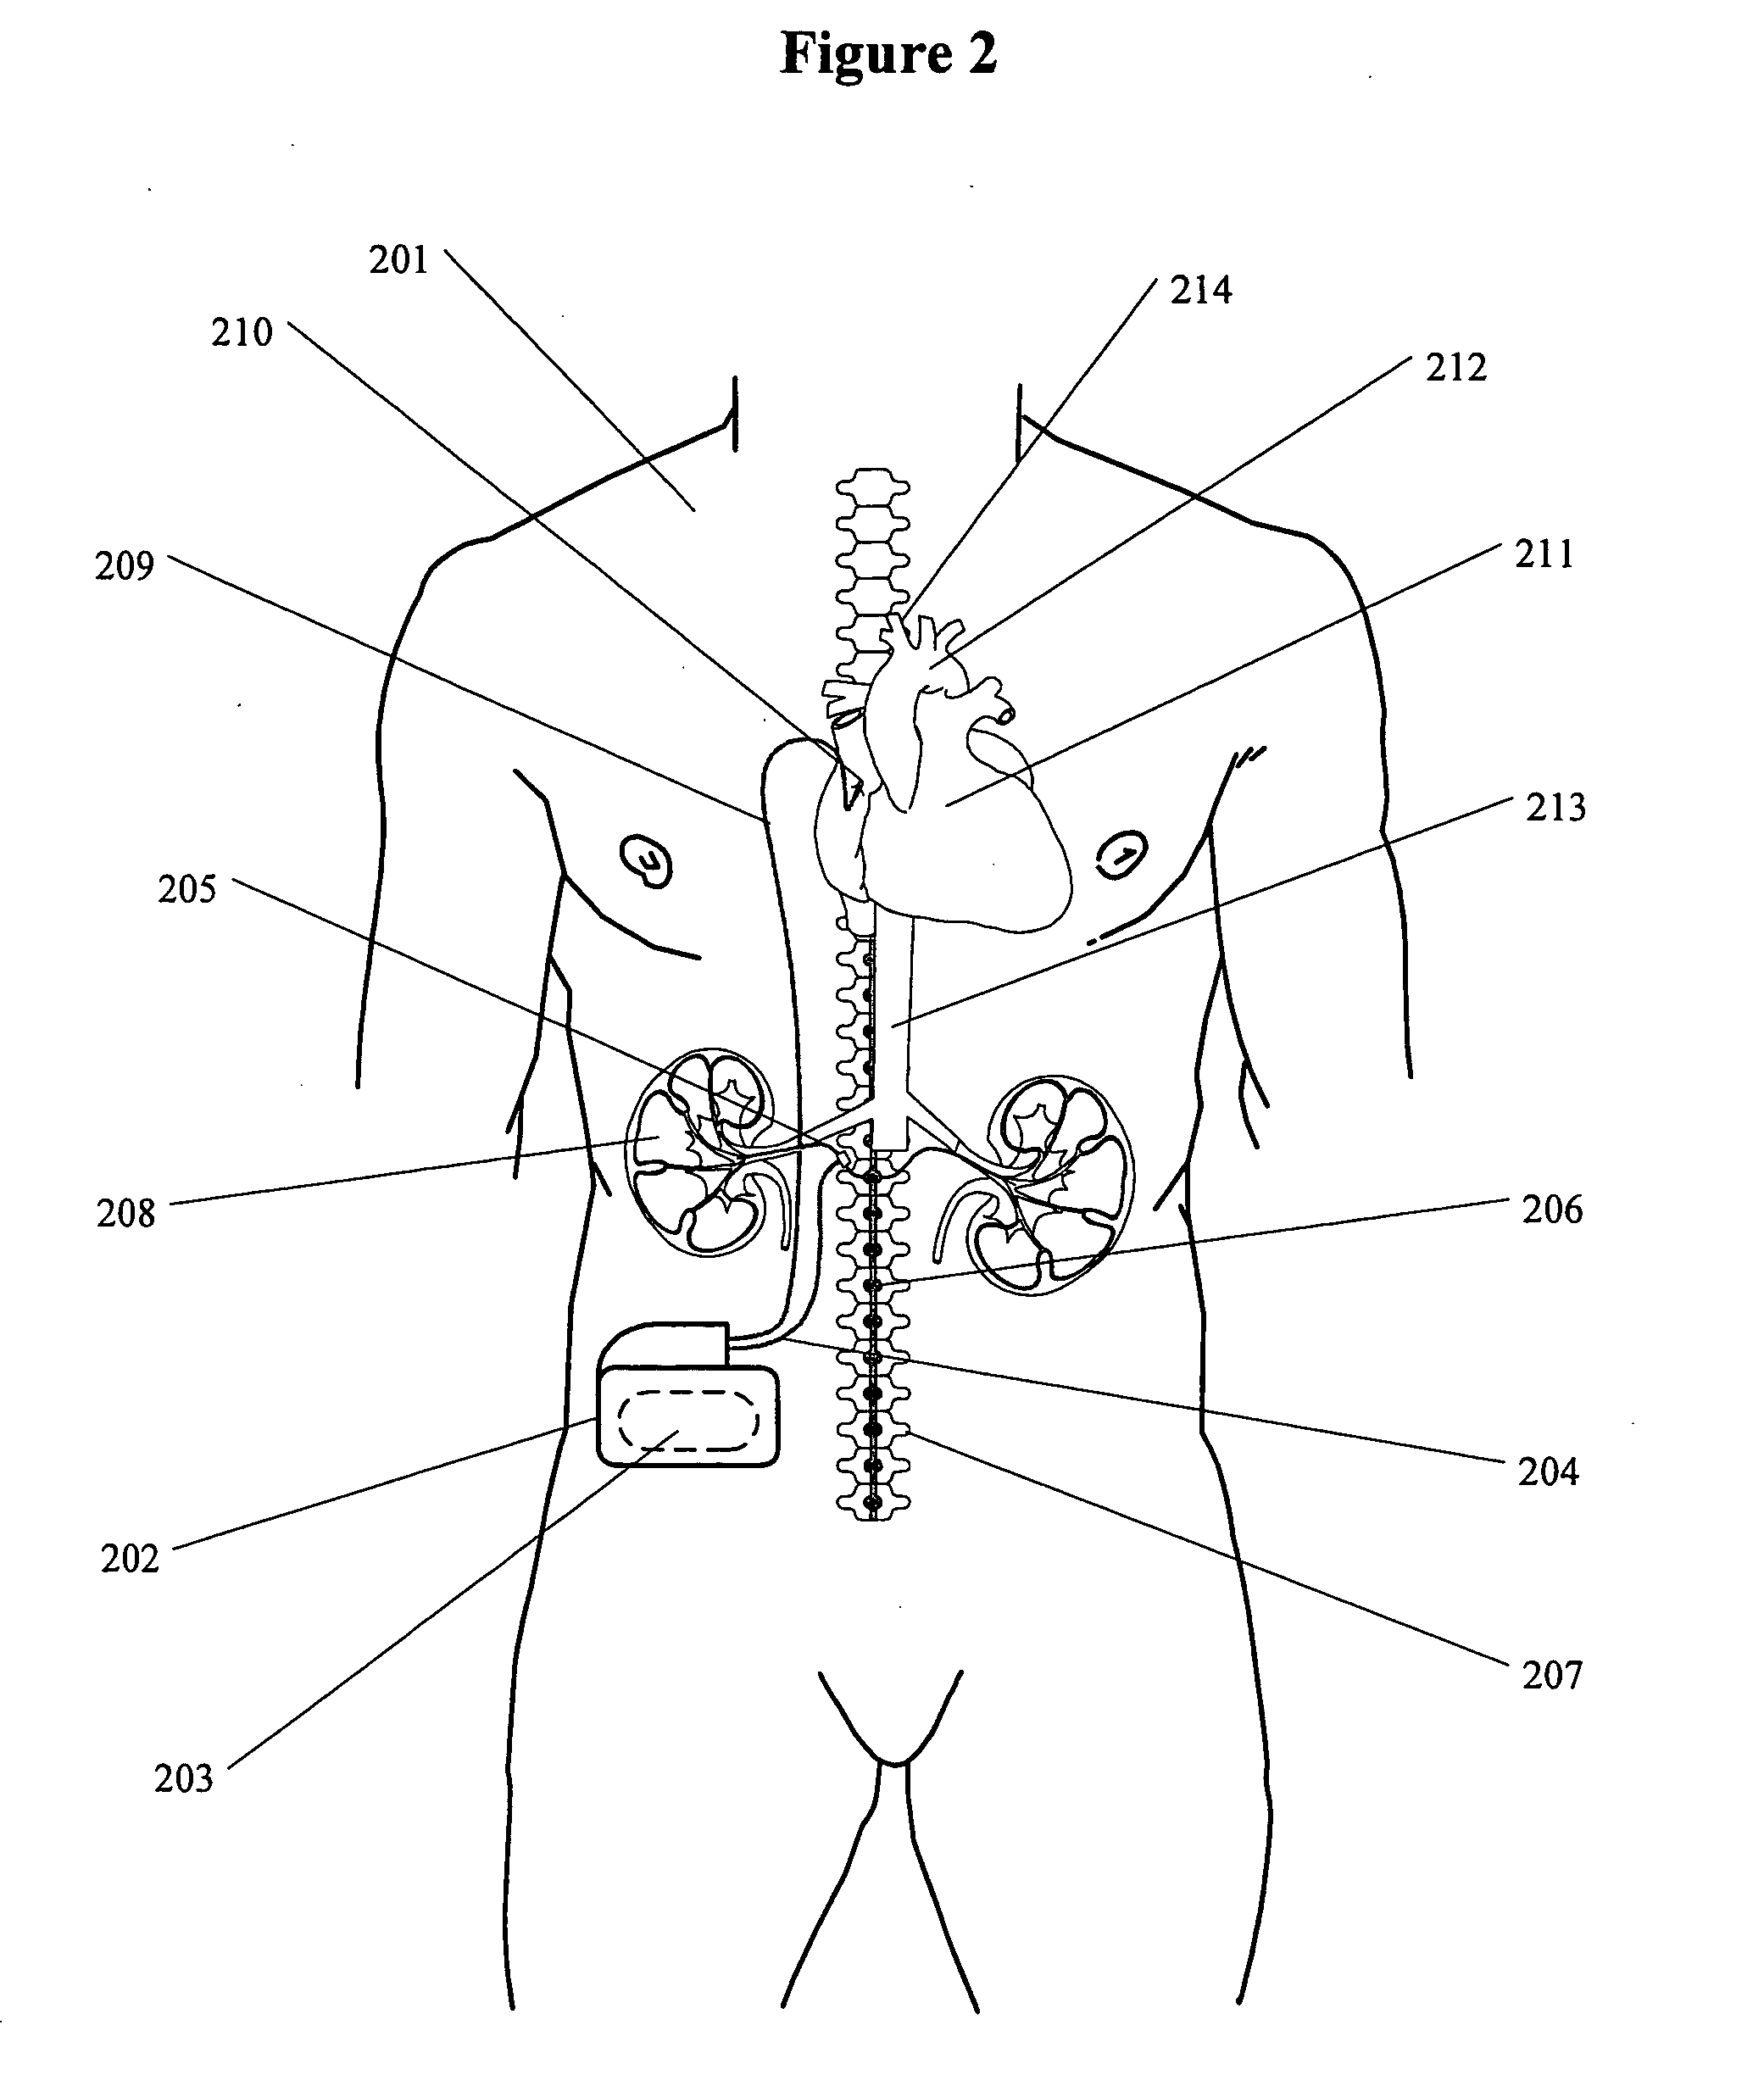 Renal nerve stimulation method and apparatus for treatment of patients